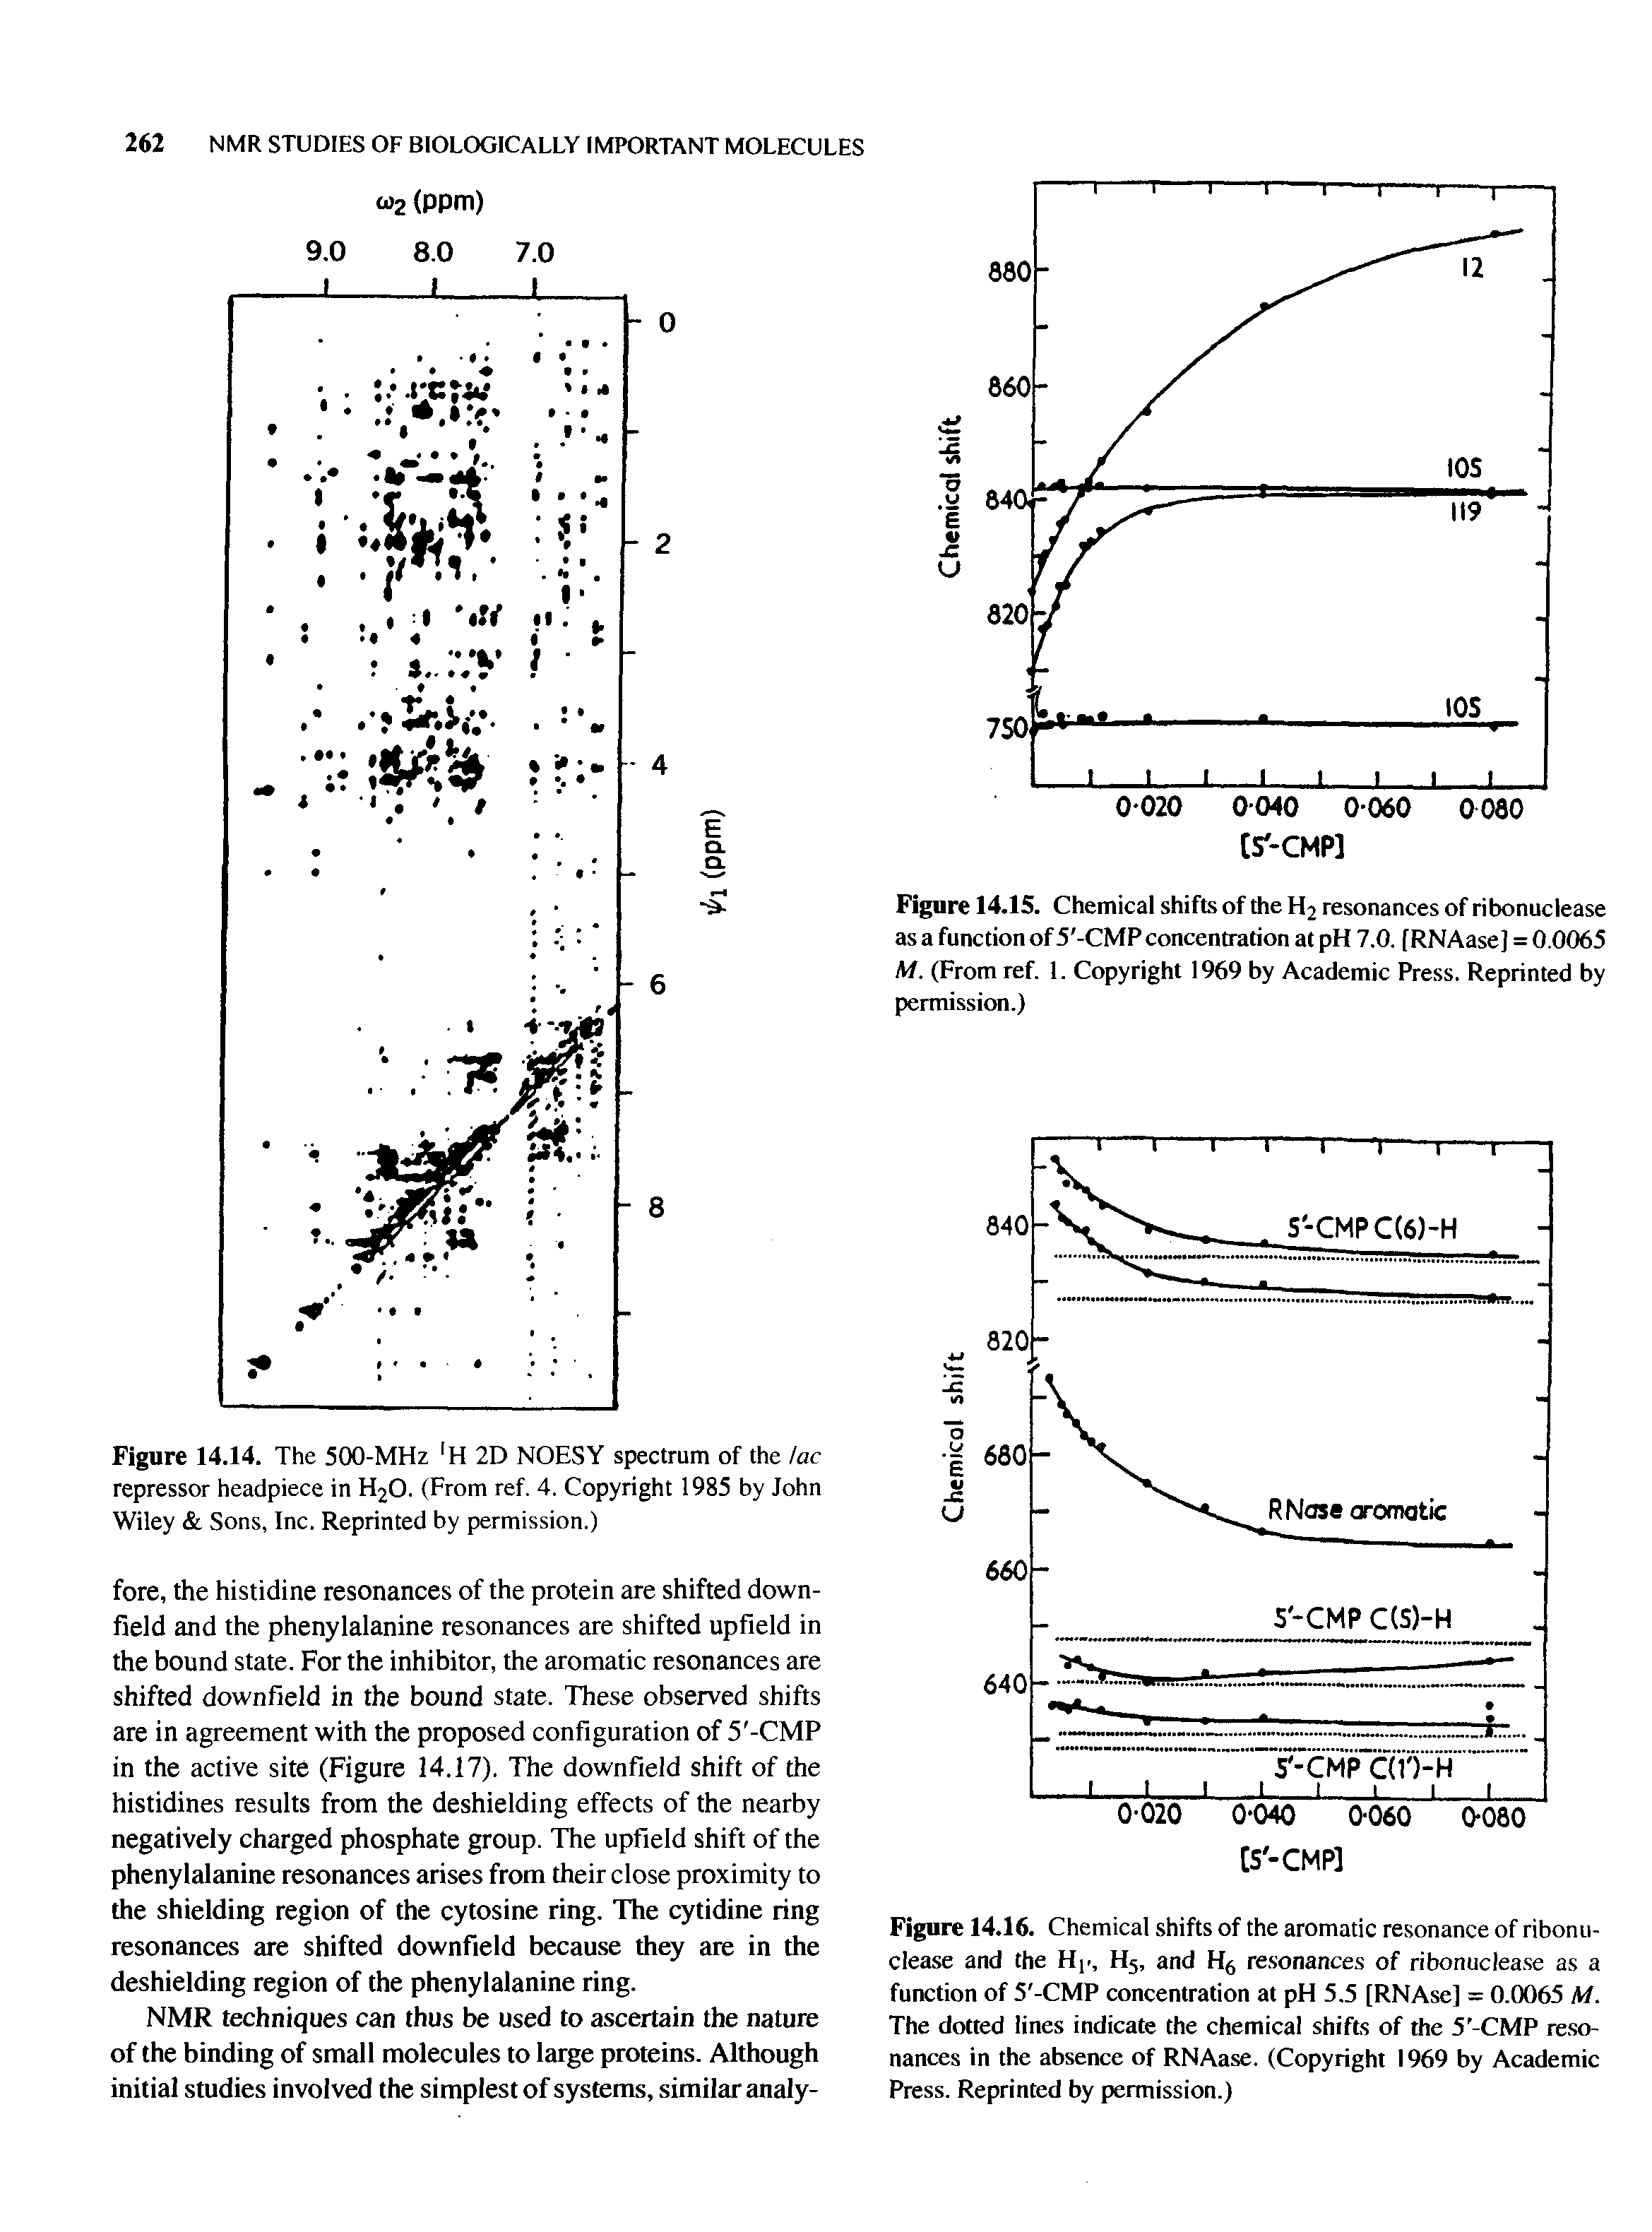 Figure 14.14. The 500-MHz 1H 2D NOESY spectrum of the lac repressor headpiece in H2O. (From ref. 4. Copyright 1985 by John Wiley Sons, Inc. Reprinted by permission.)...